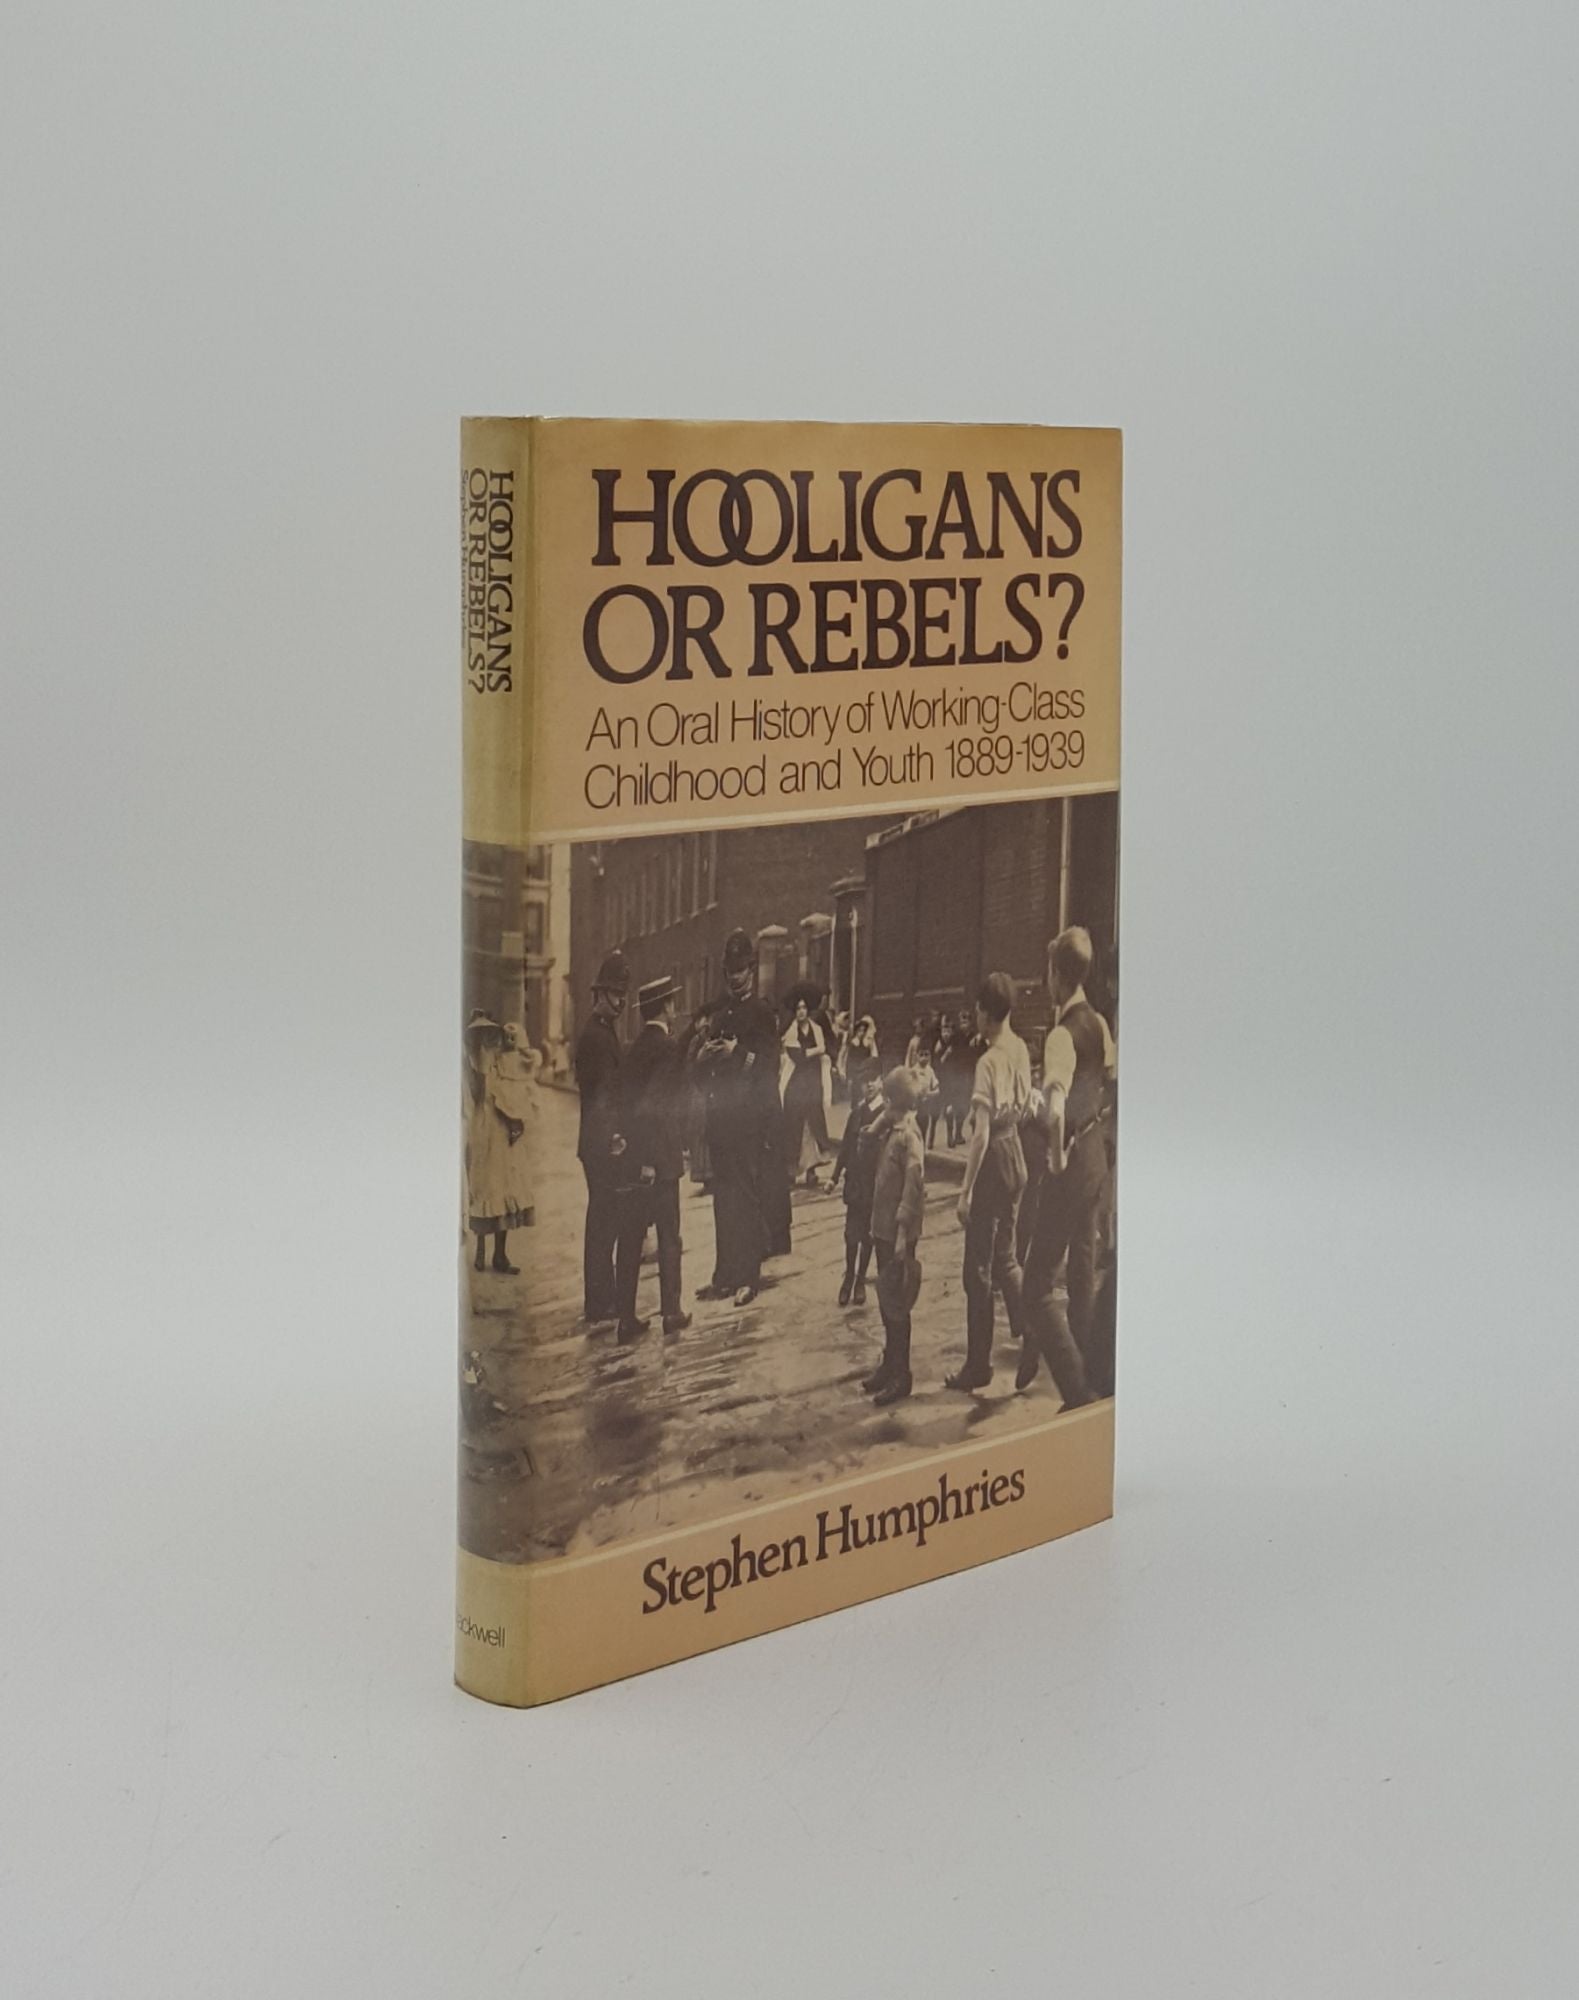 HUMPHRIES Stephen - Hooligans or Rebels an Oral History of Working-Class Childhood and Youth 1889 - 1939